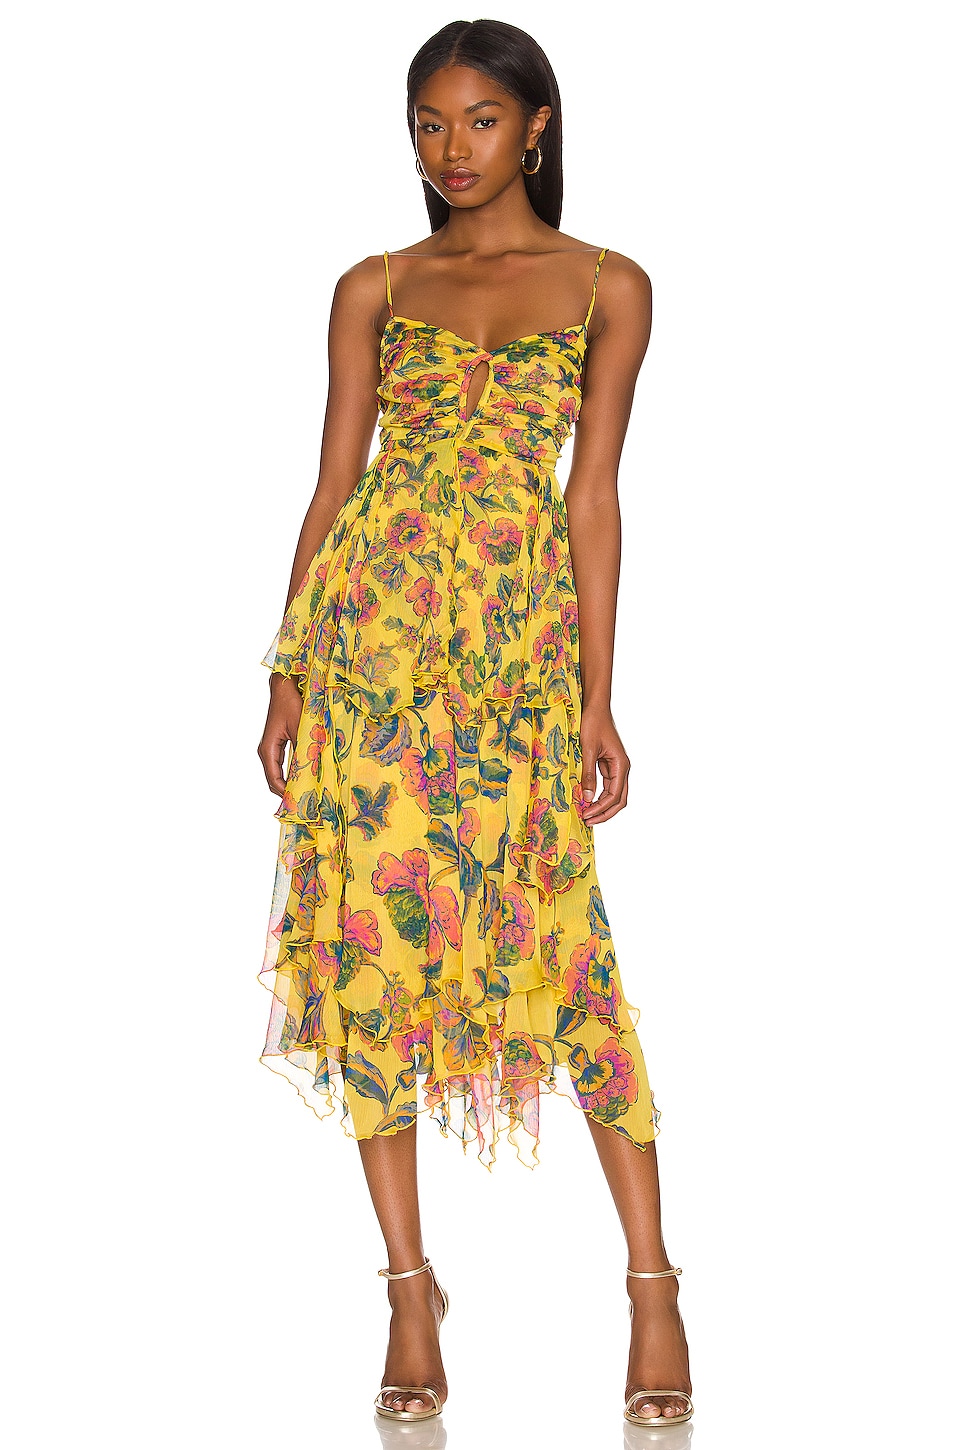 MISA Los Angeles Daphne Dress in Grand Canary Mix | REVOLVE